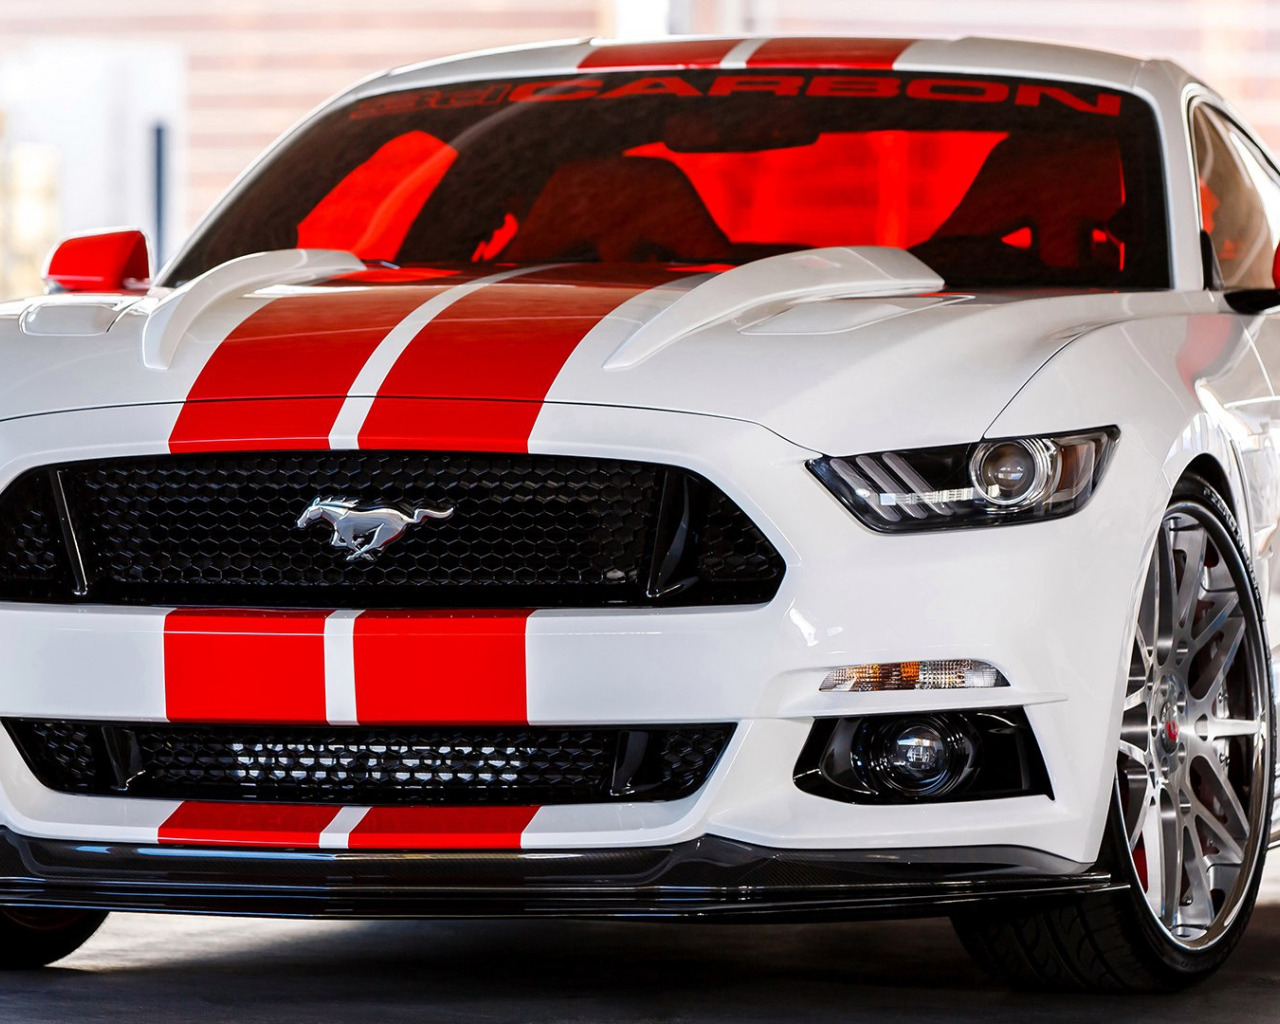 2018 Ford Mustang Sports Car | Ford.com